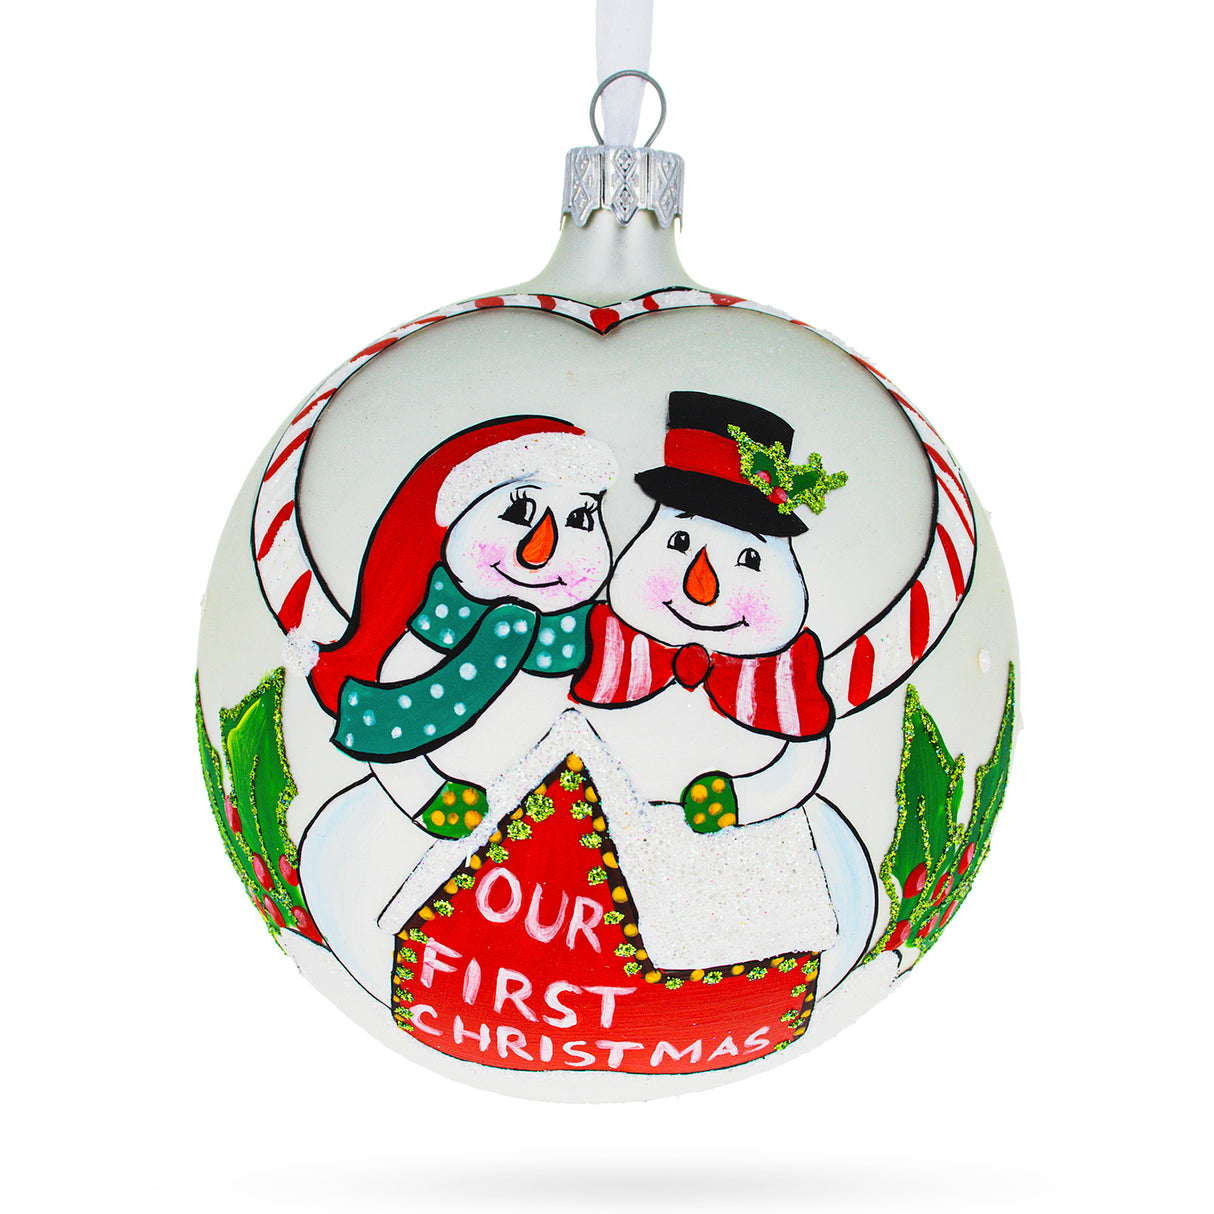 Snowmen Celebrating 'Our First Christmas' Blown Glass Ball Christmas Ornament 4 Inches in Multi color, Round shape